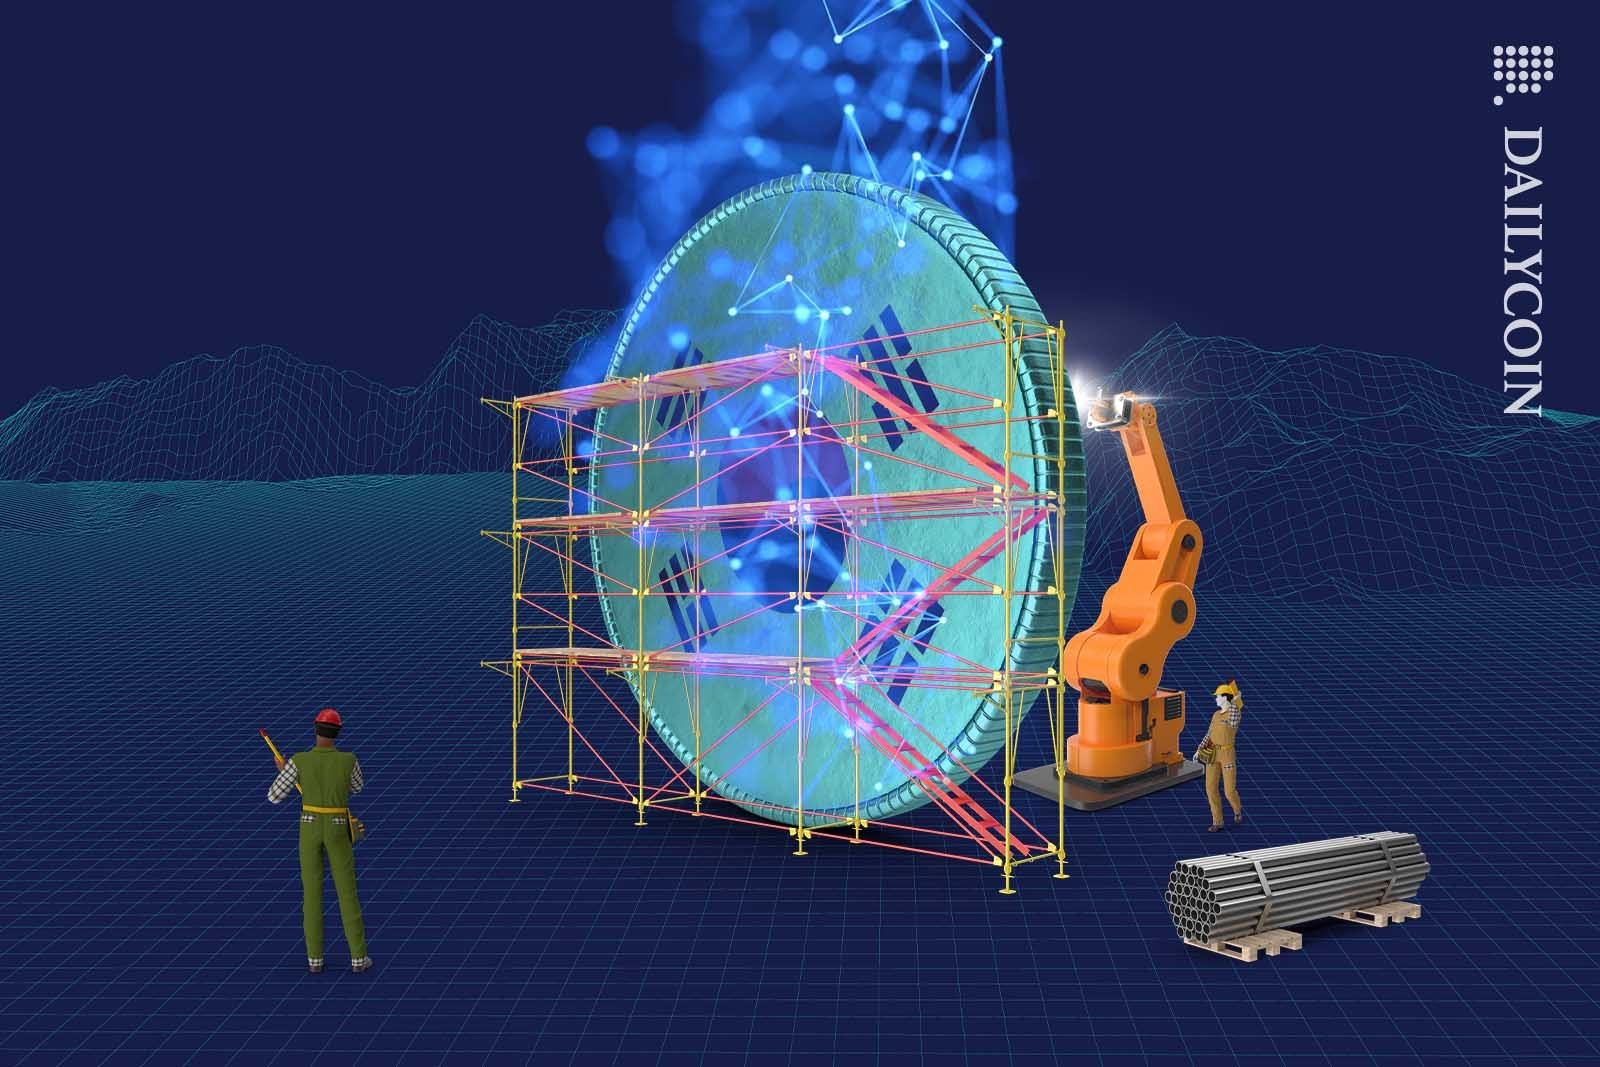 Digital coin surrounded by scaffolding being build by people and robots.